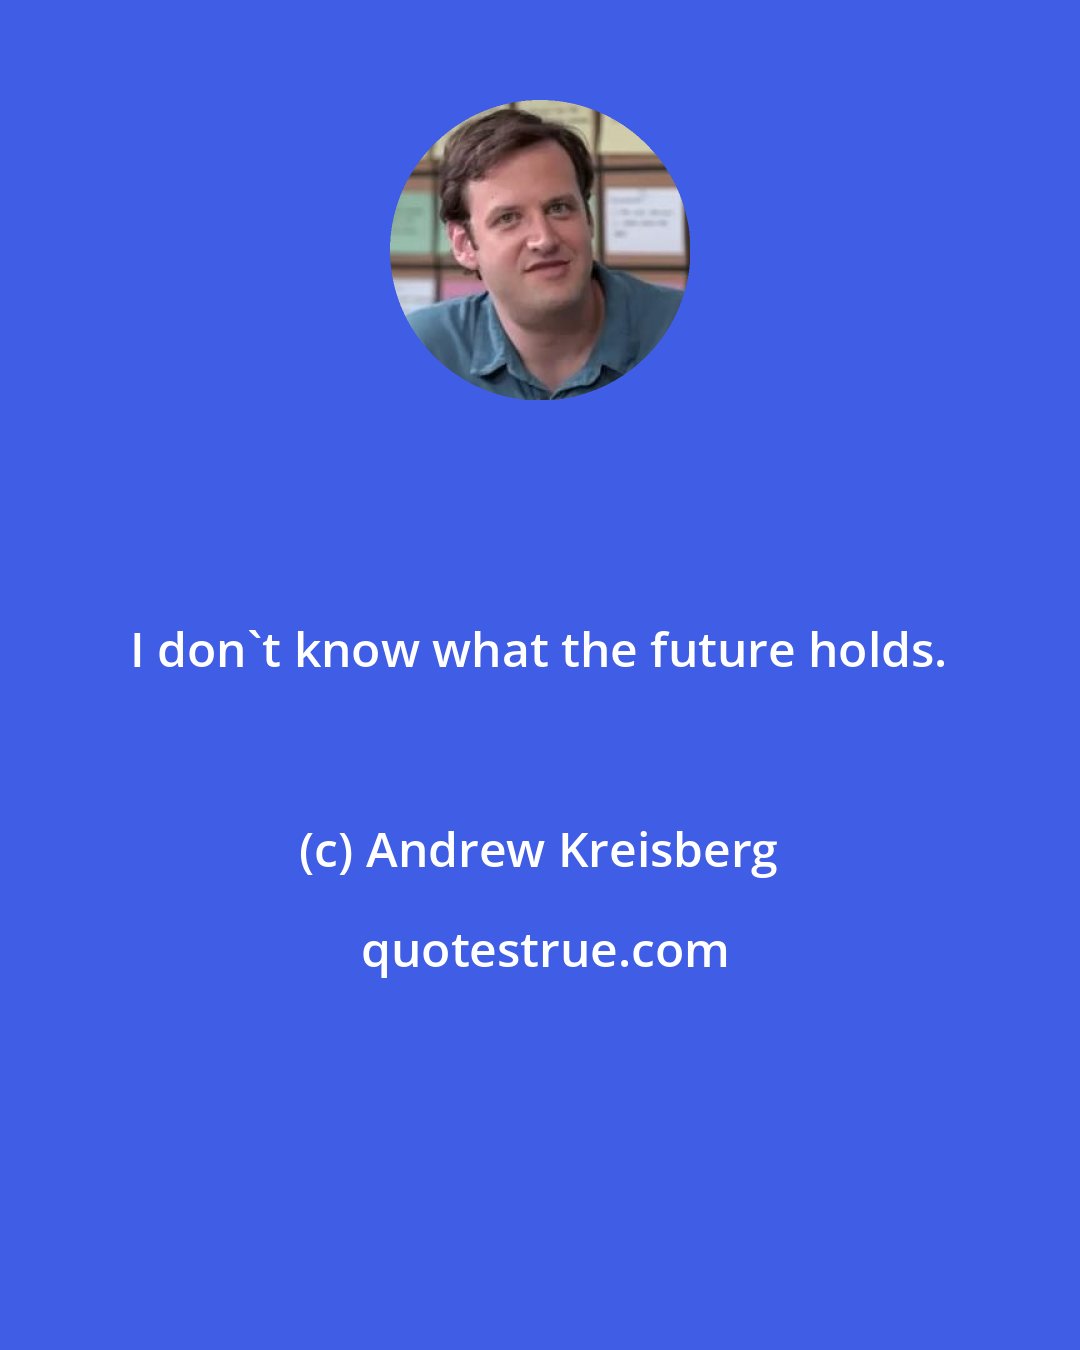 Andrew Kreisberg: I don't know what the future holds.